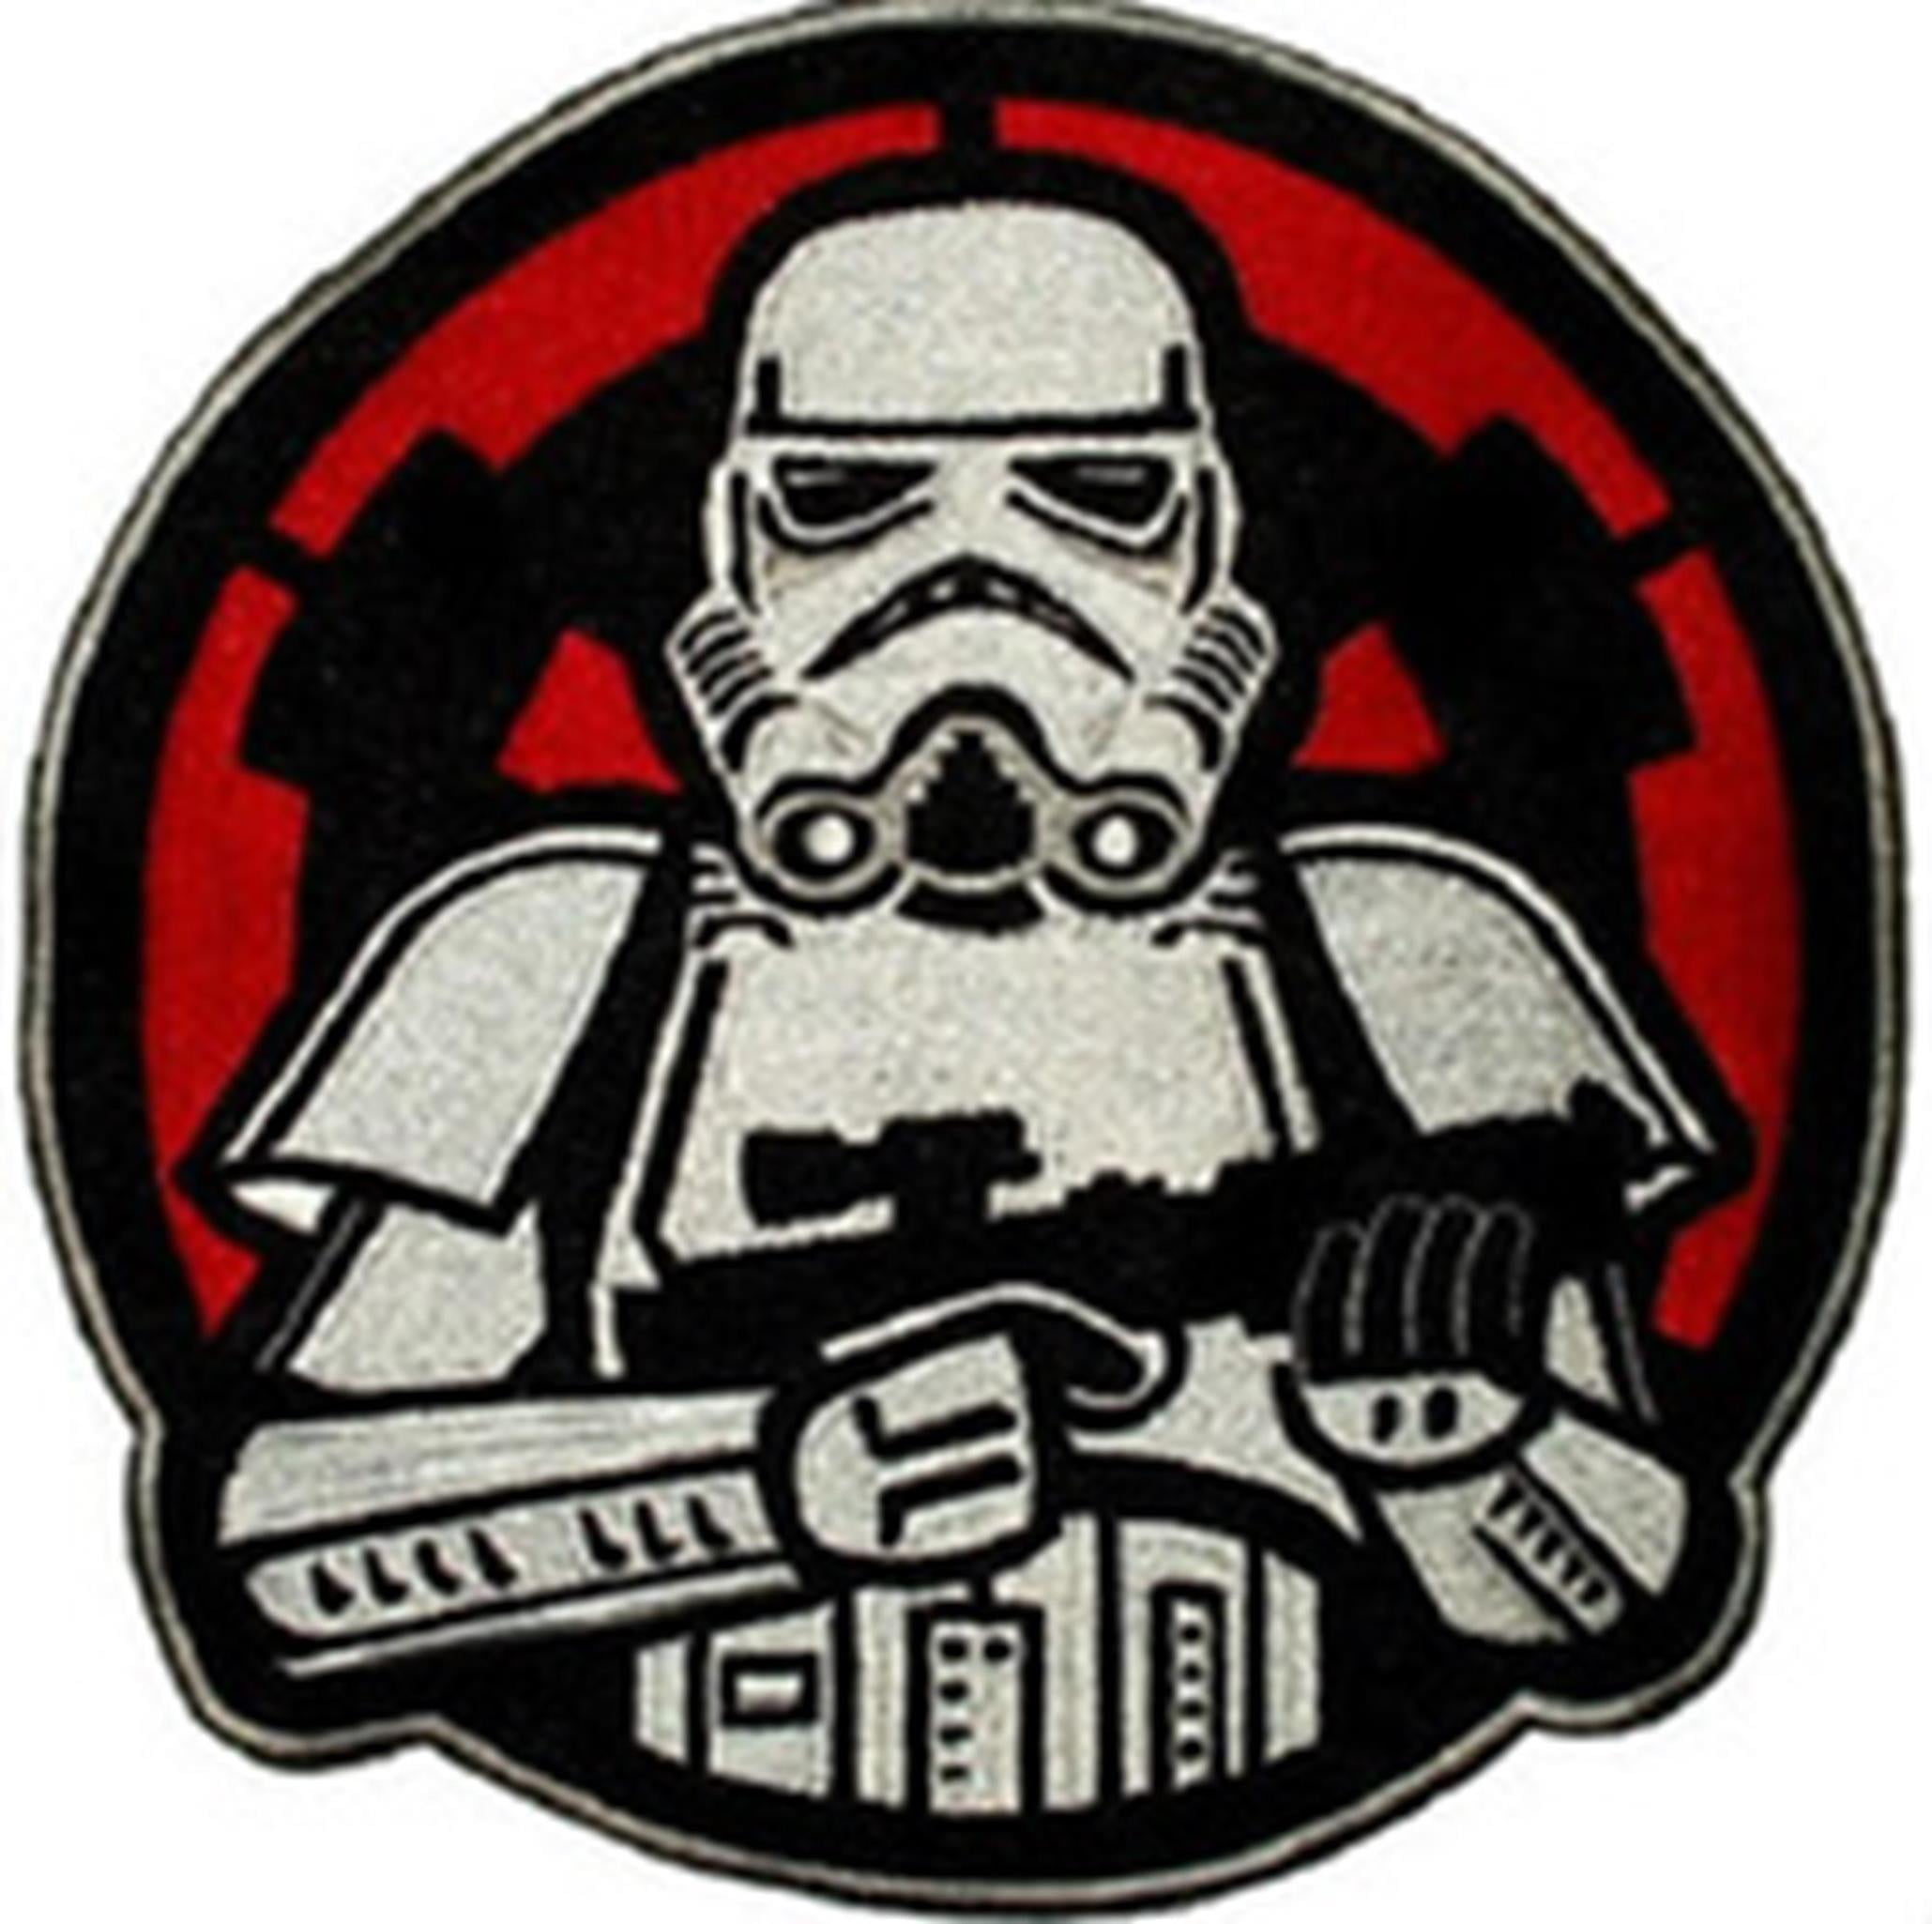 Star Wars Movie Storm Trooper badges Iron on Sew on Embroidered Patch